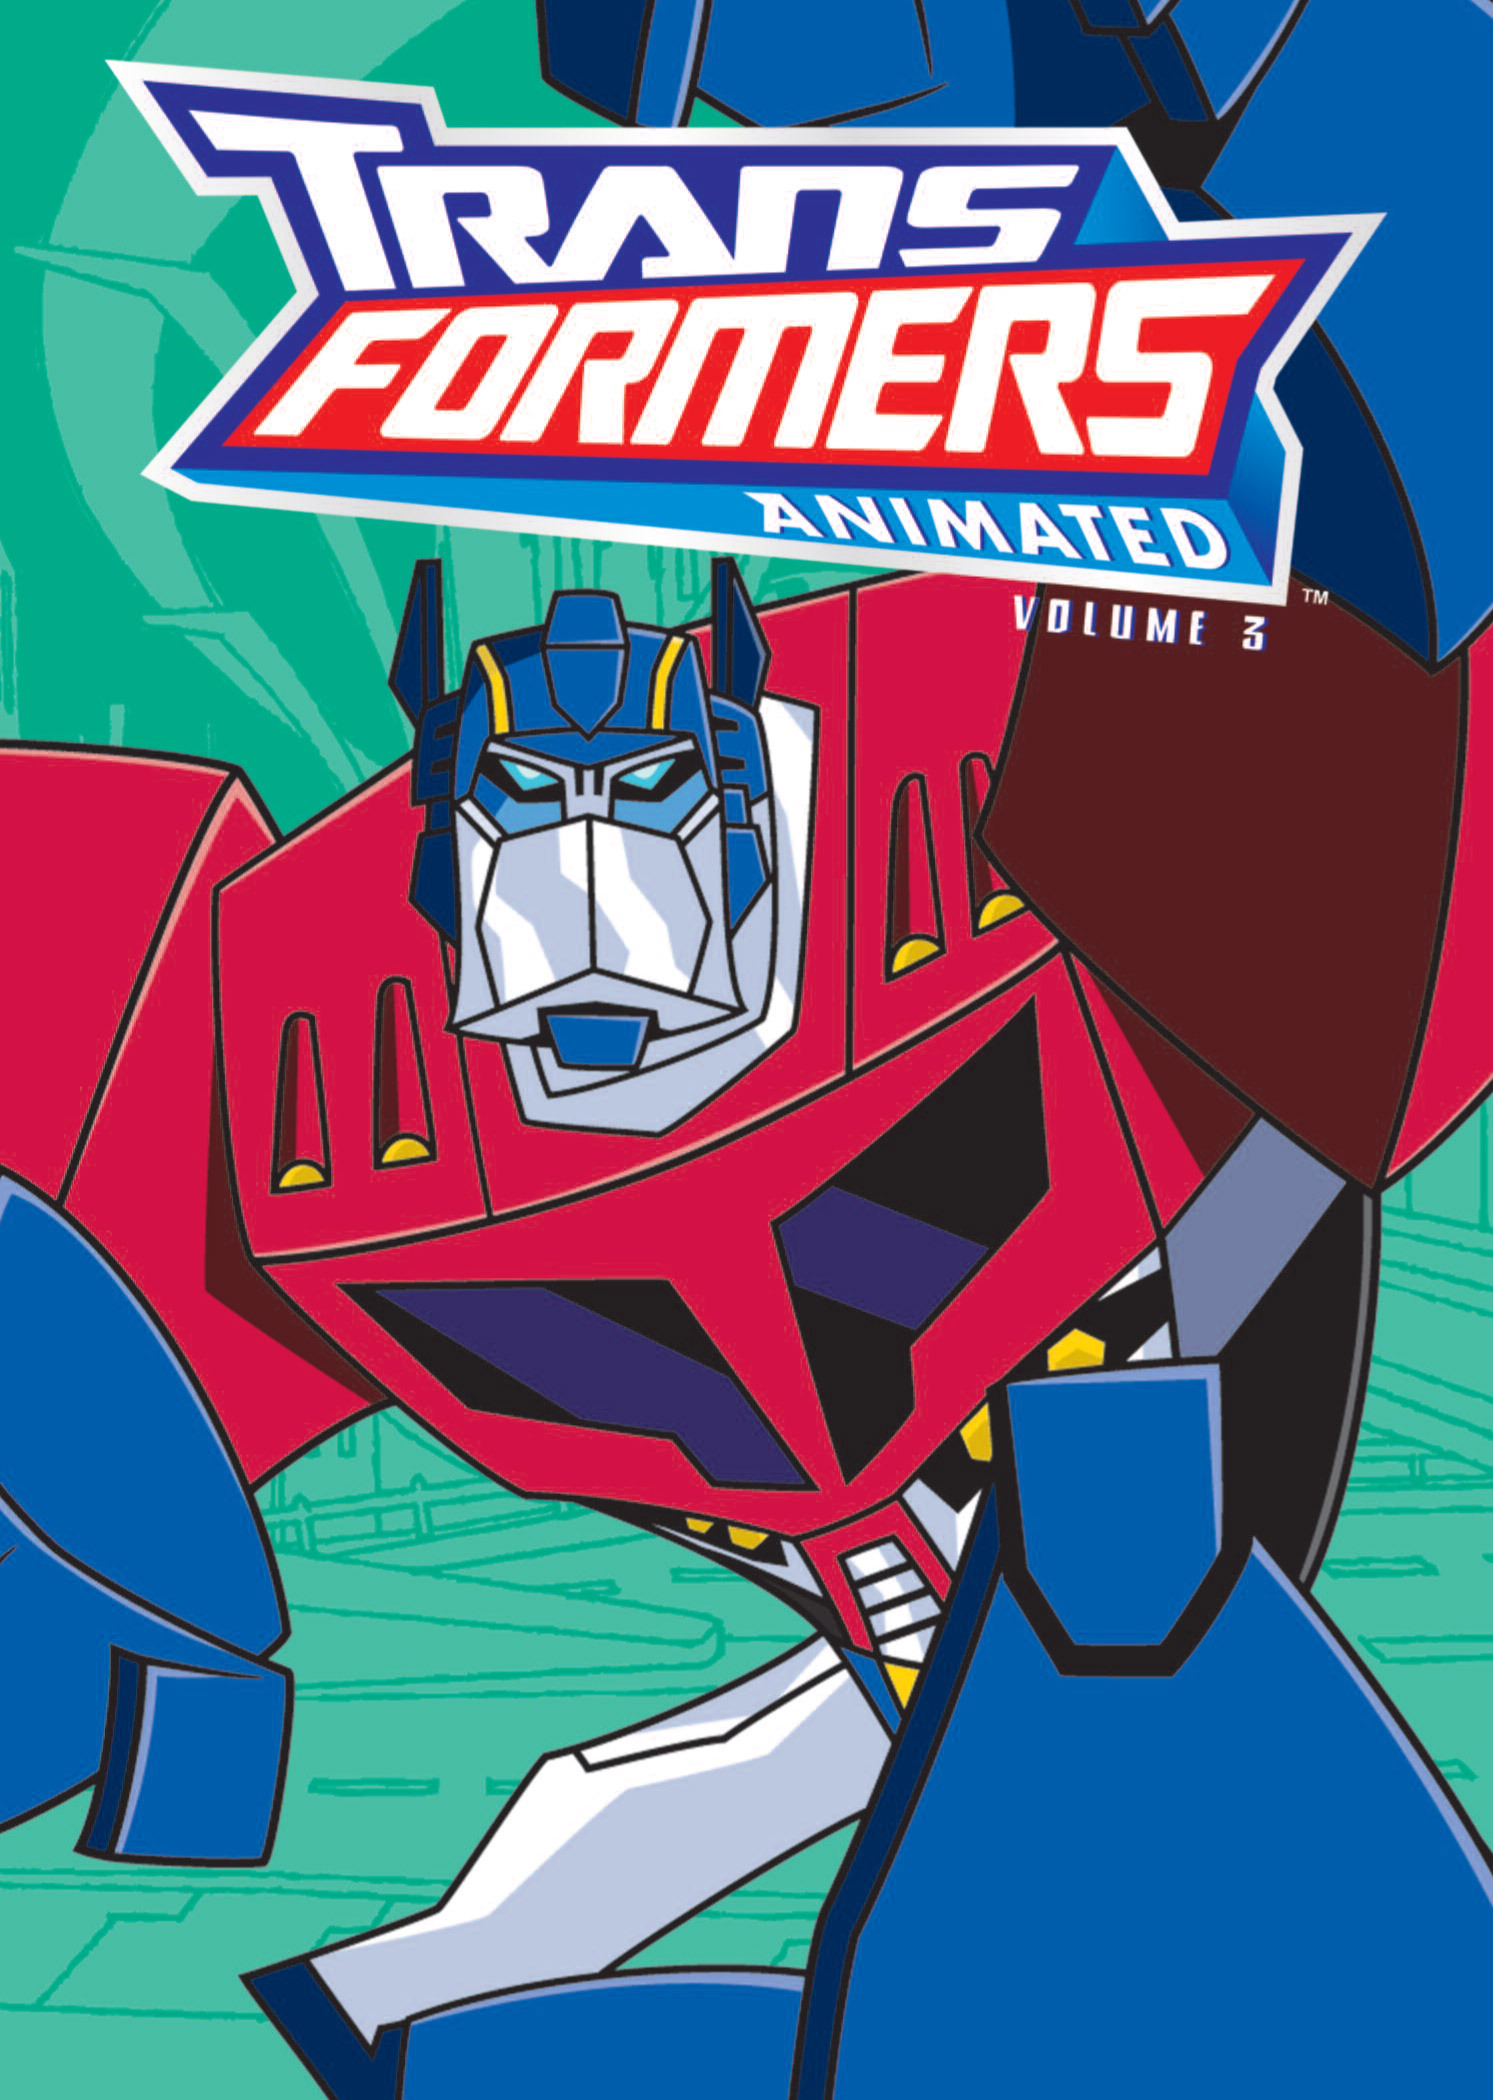 Transformers Animated 03 | Read Transformers Animated 03 comic online in  high quality. Read Full Comic online for free - Read comics online in high  quality .